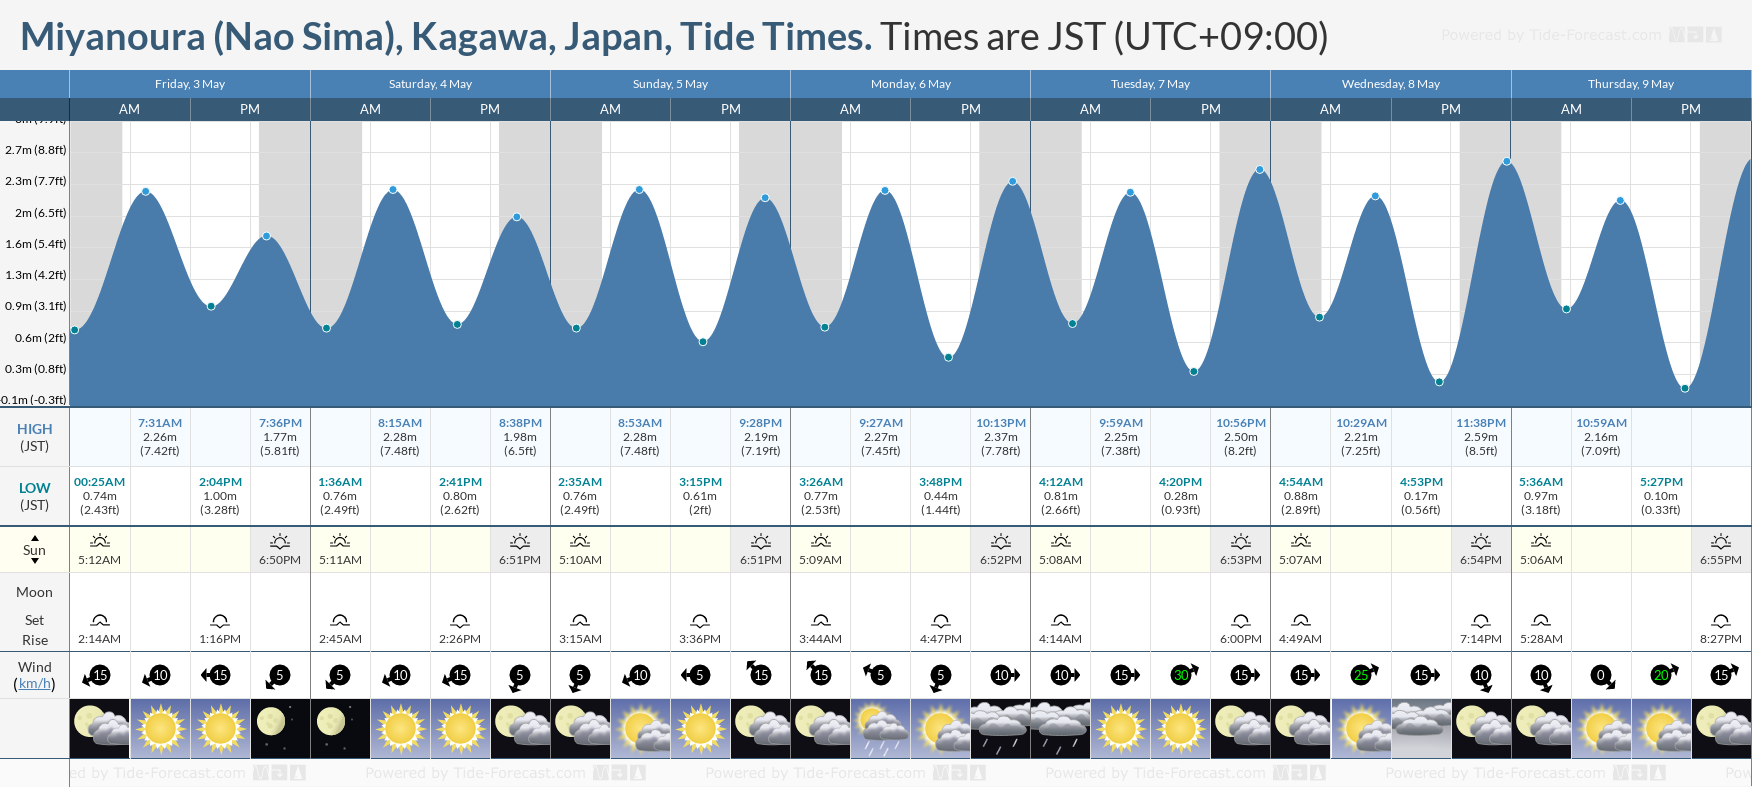 Miyanoura (Nao Sima), Kagawa, Japan Tide Chart including high and low tide tide times for the next 7 days